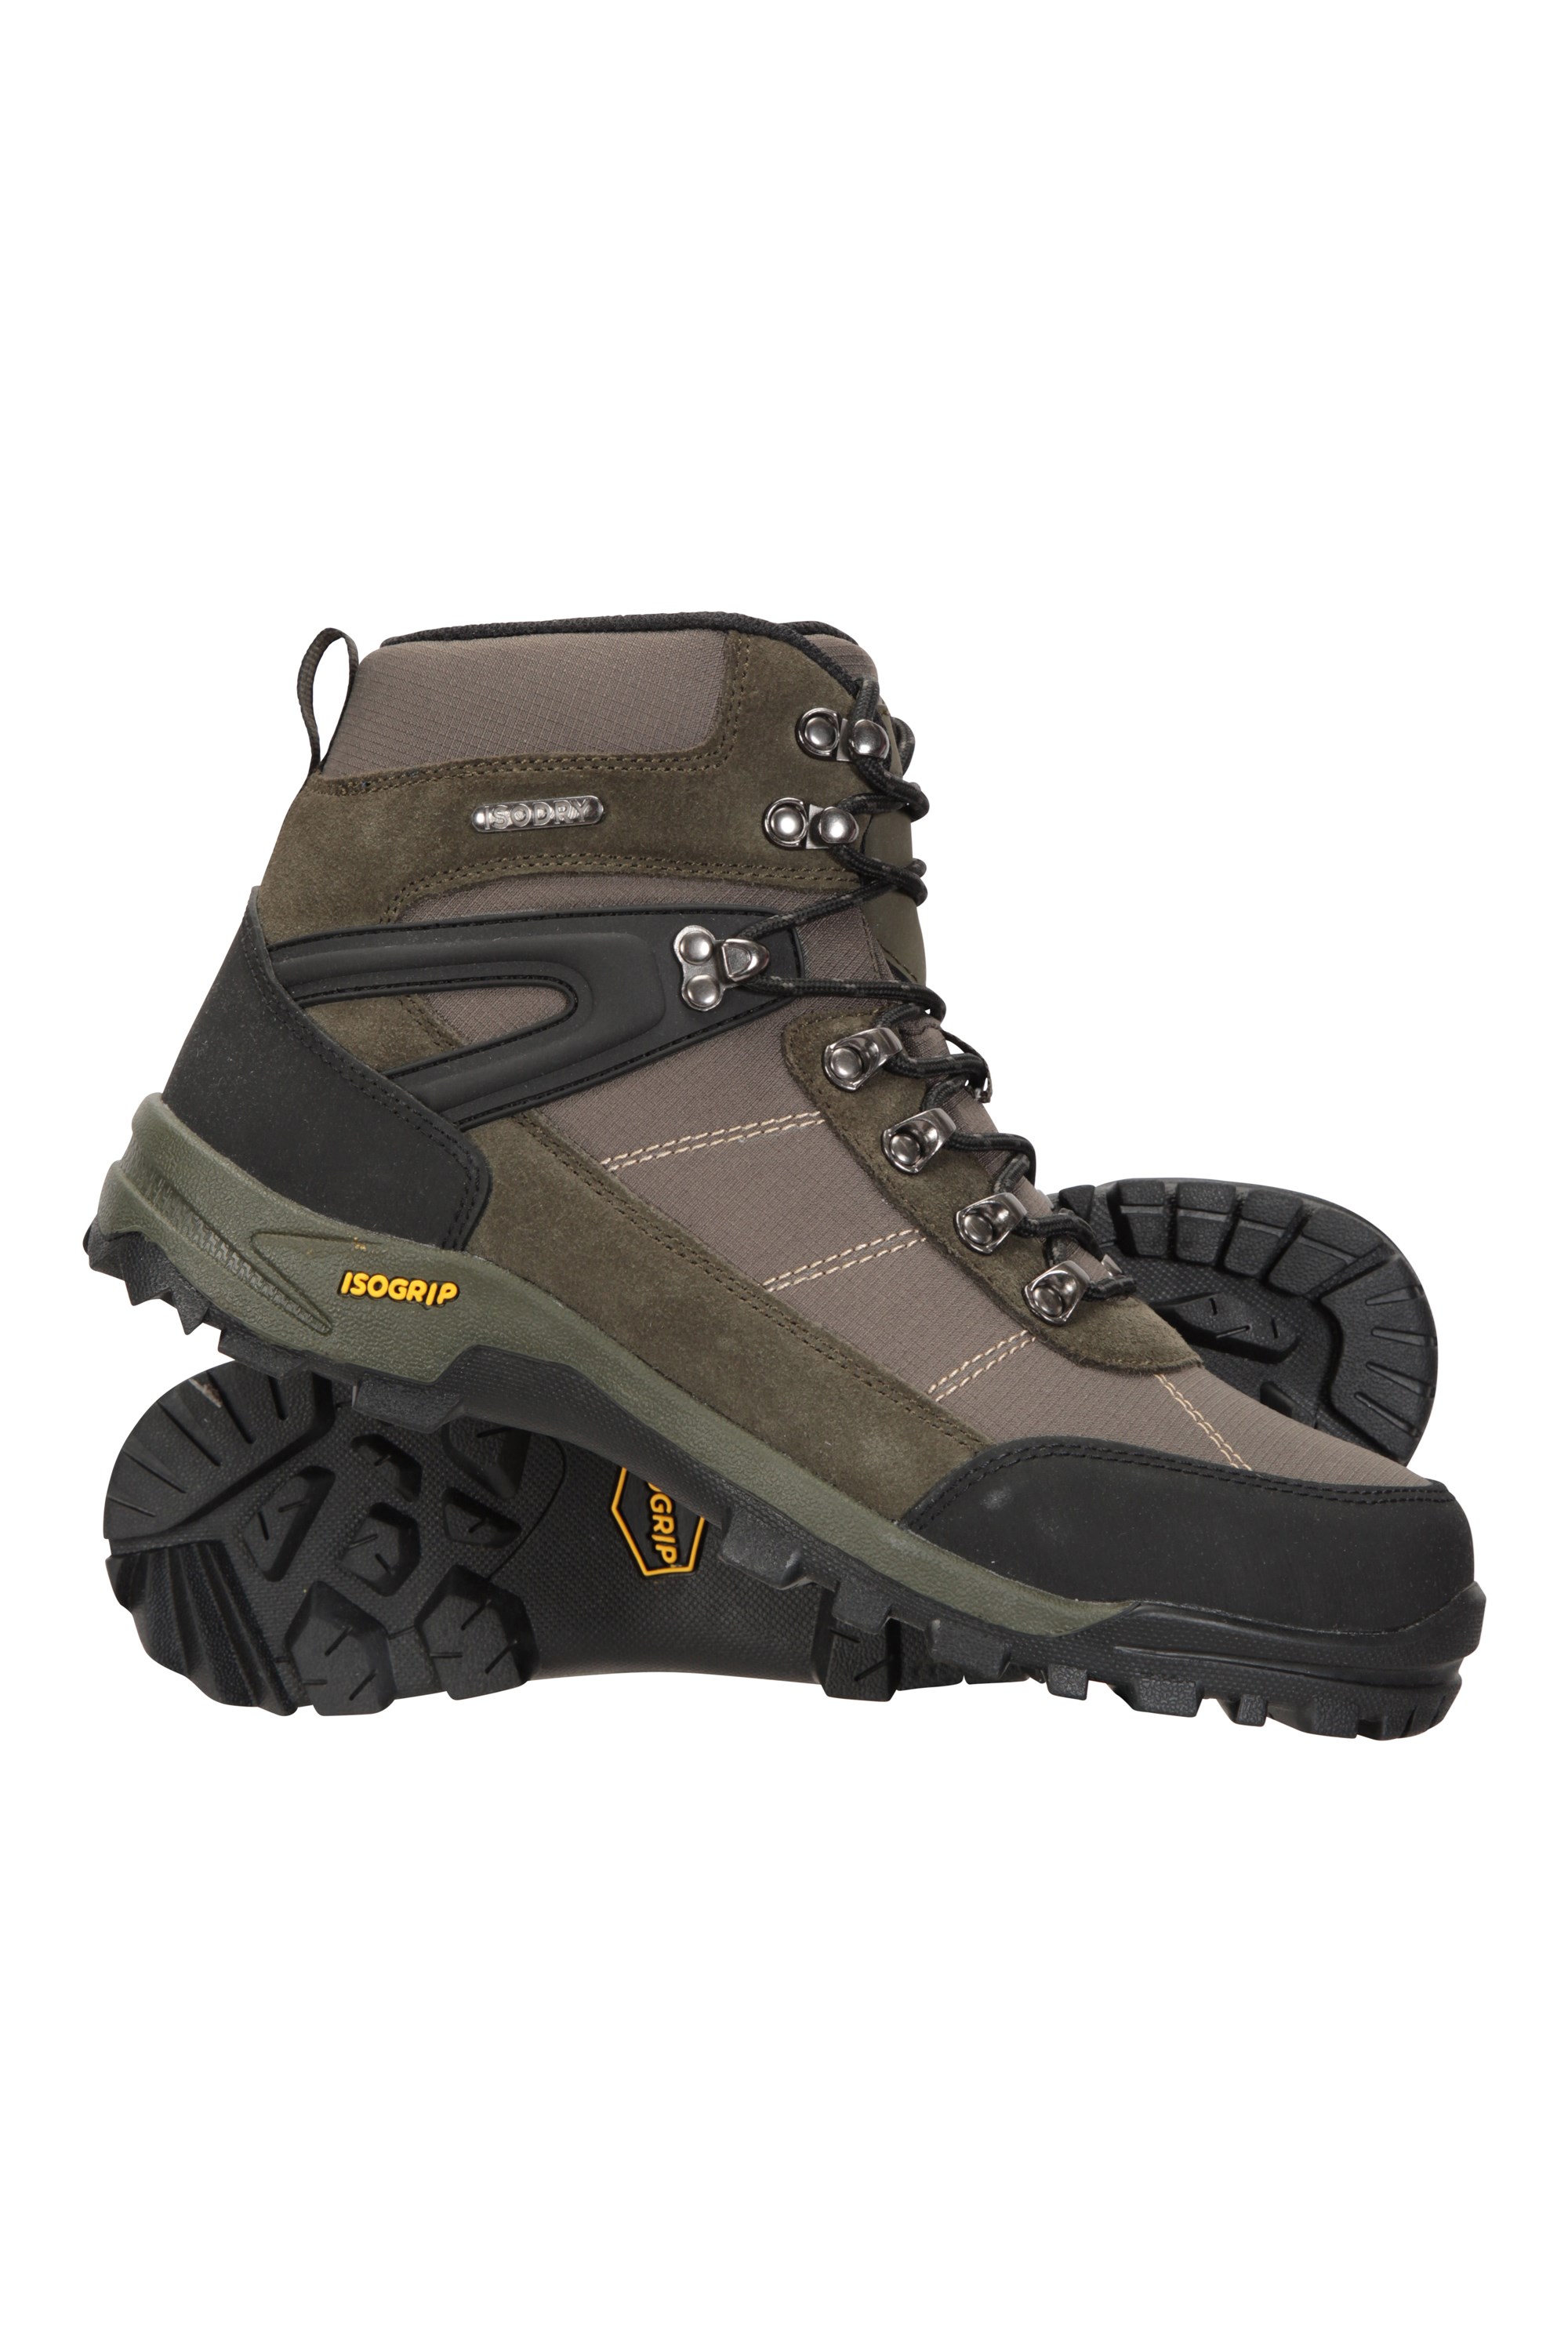 Extreme Storm Mens Waterproof IsoGrip Boots - Green